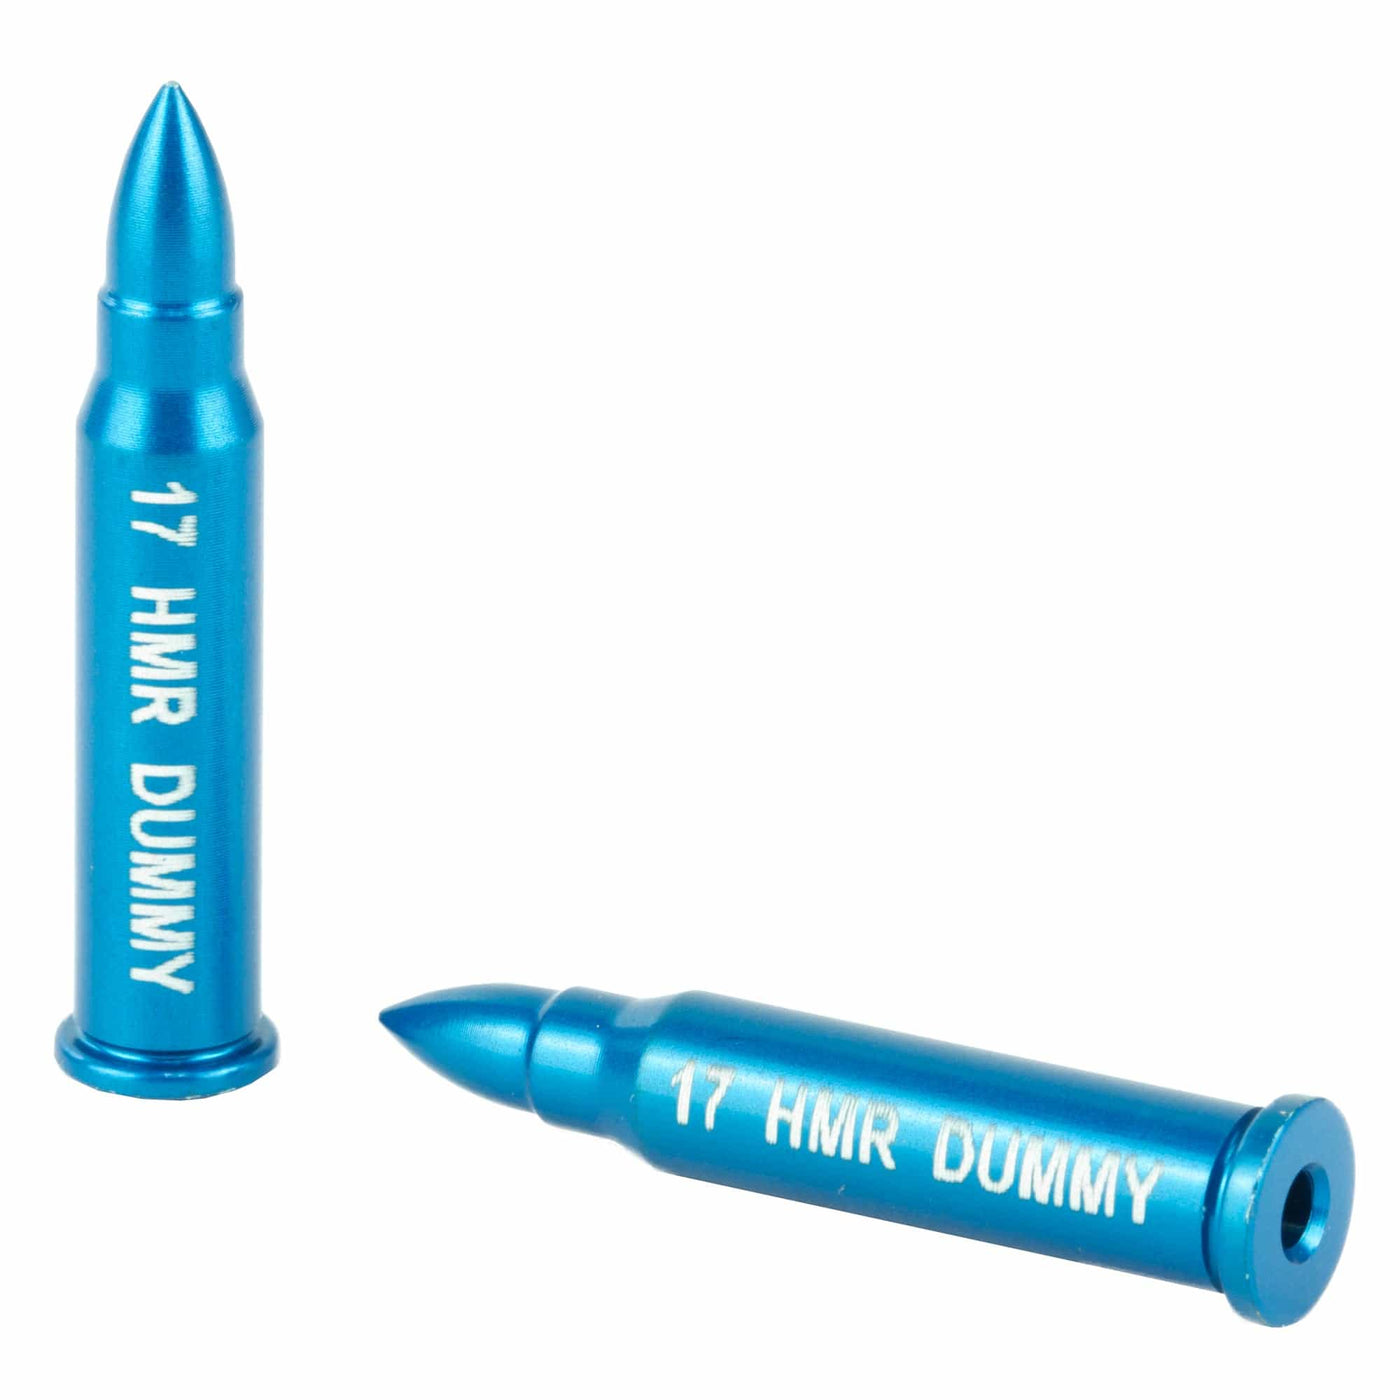 A-Zoom A-zoom Training Rounds .17hmr - Aluminum 6-pack Ammo